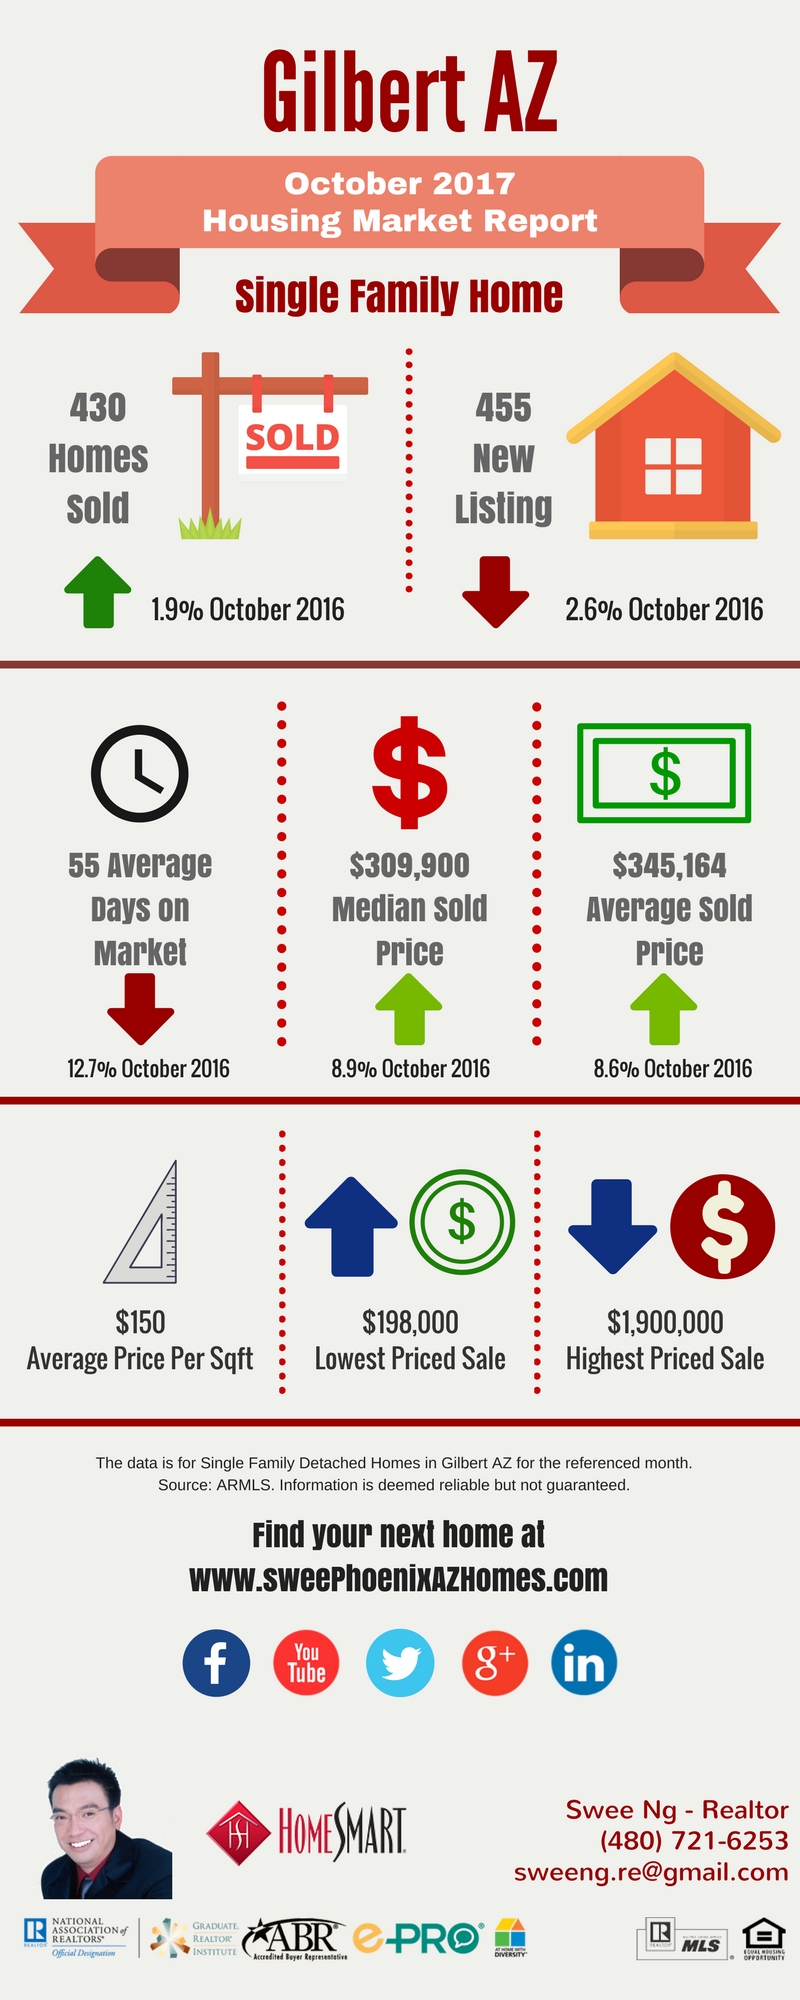 Gilbert AZ Housing Market Trends Report October 2017 by Swee Ng, Real Estate and House Value